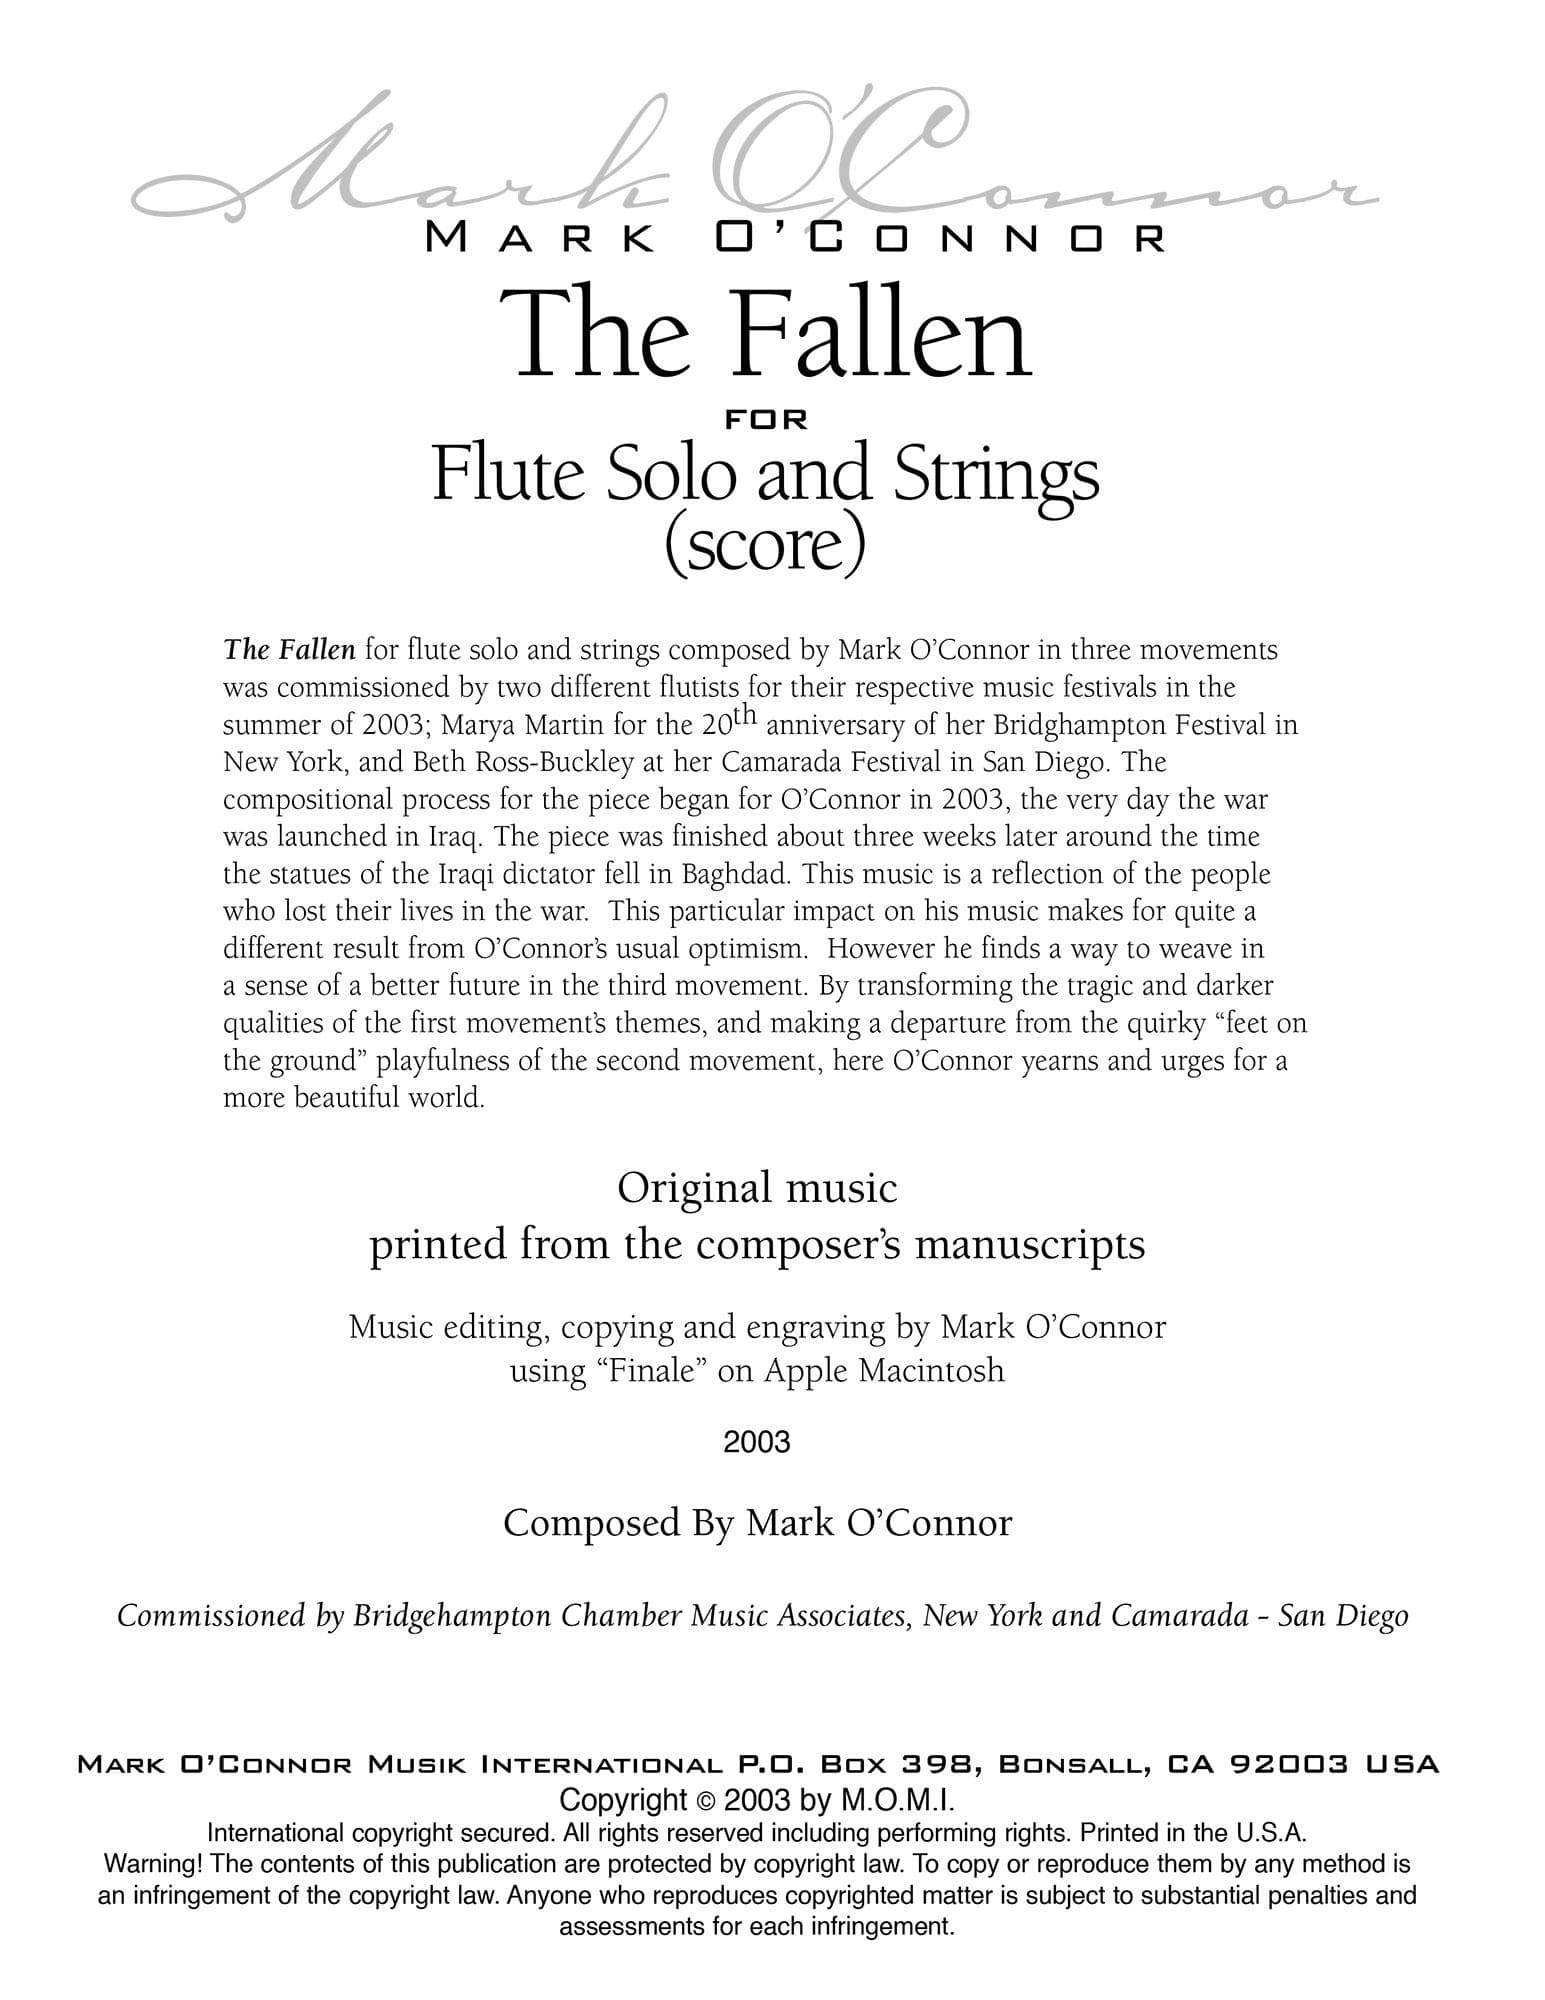 O'Connor, Mark - The Fallen for Flute and Strings - Score - Digital Download